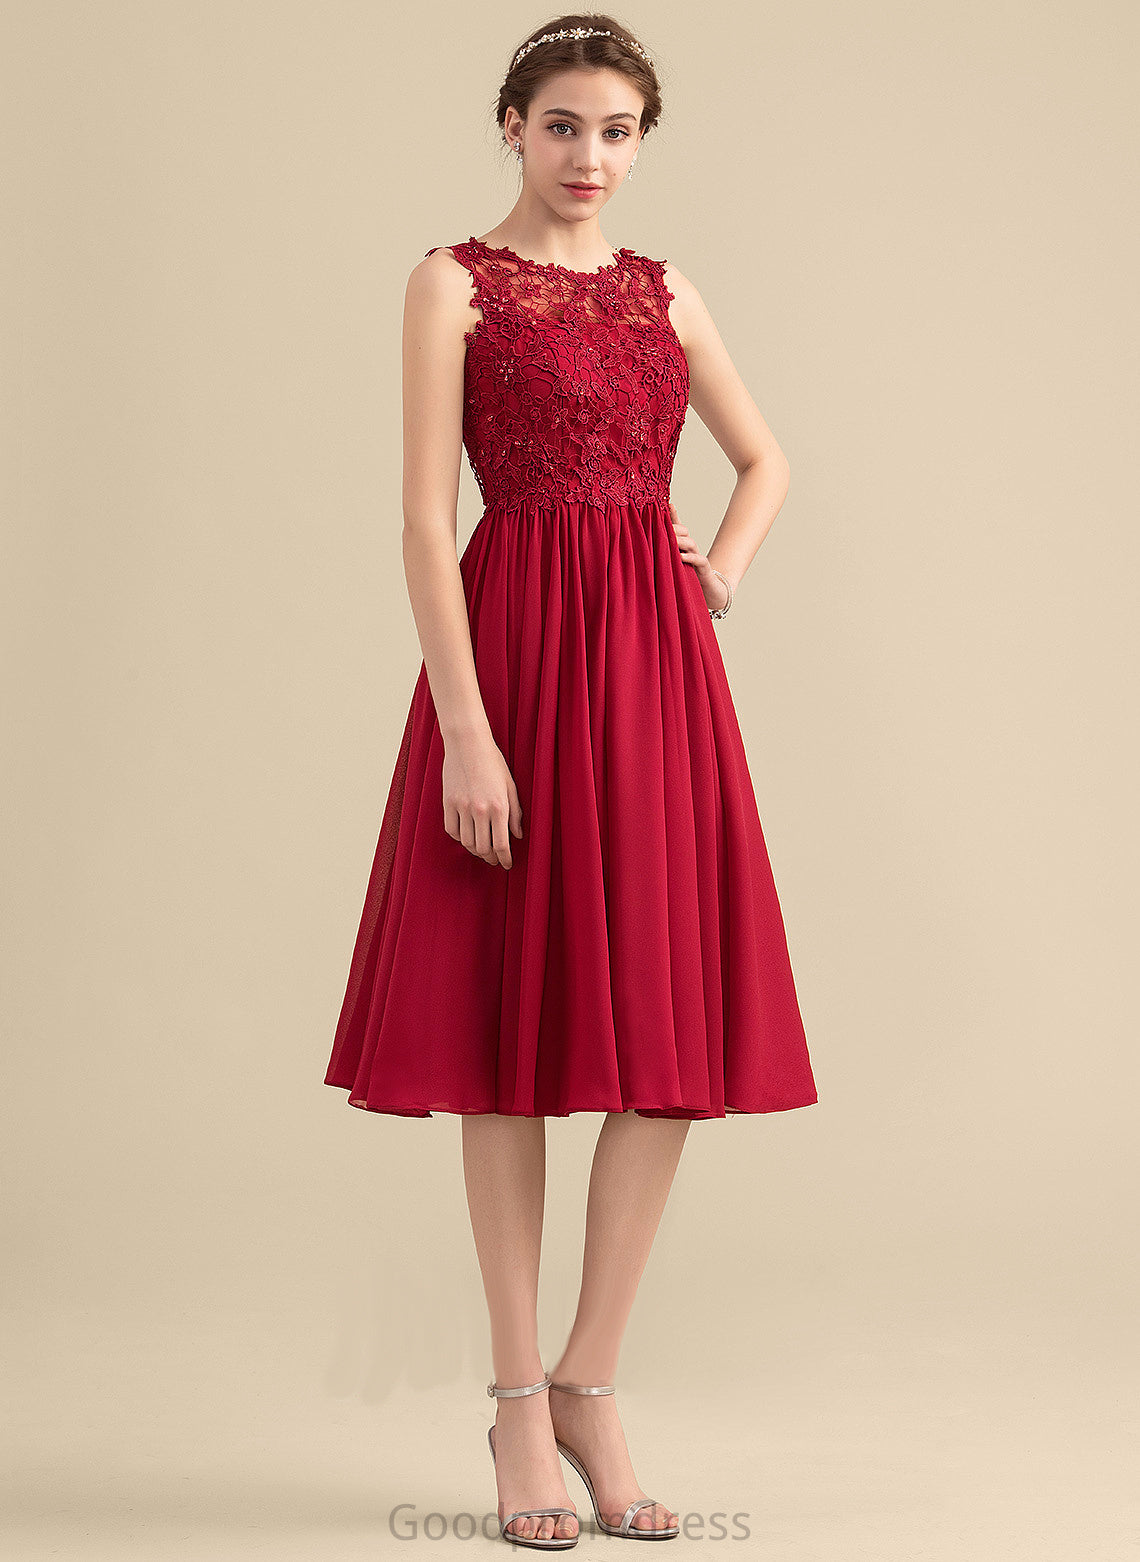 Knee-Length A-Line Neck Dress Beading Naima Lace With Homecoming Chiffon Scoop Lace Homecoming Dresses